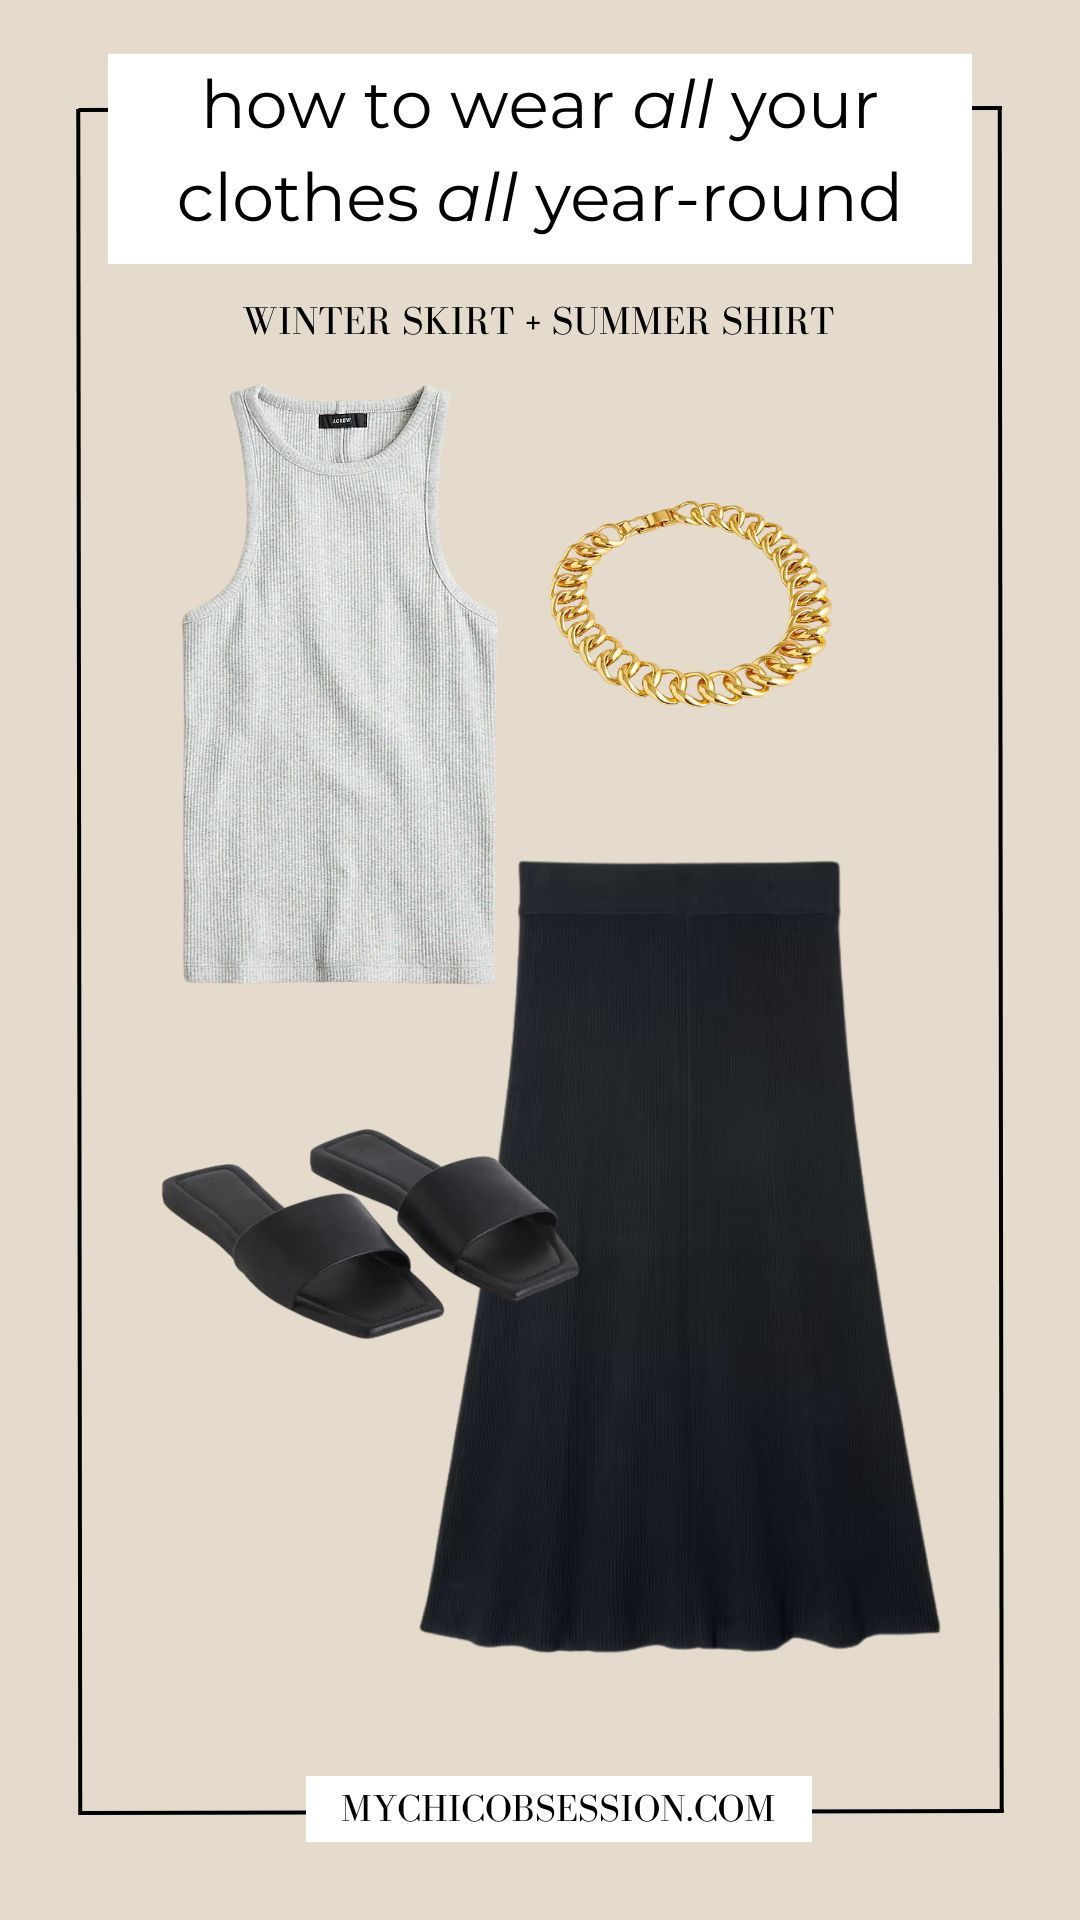 wool skirt and tank top